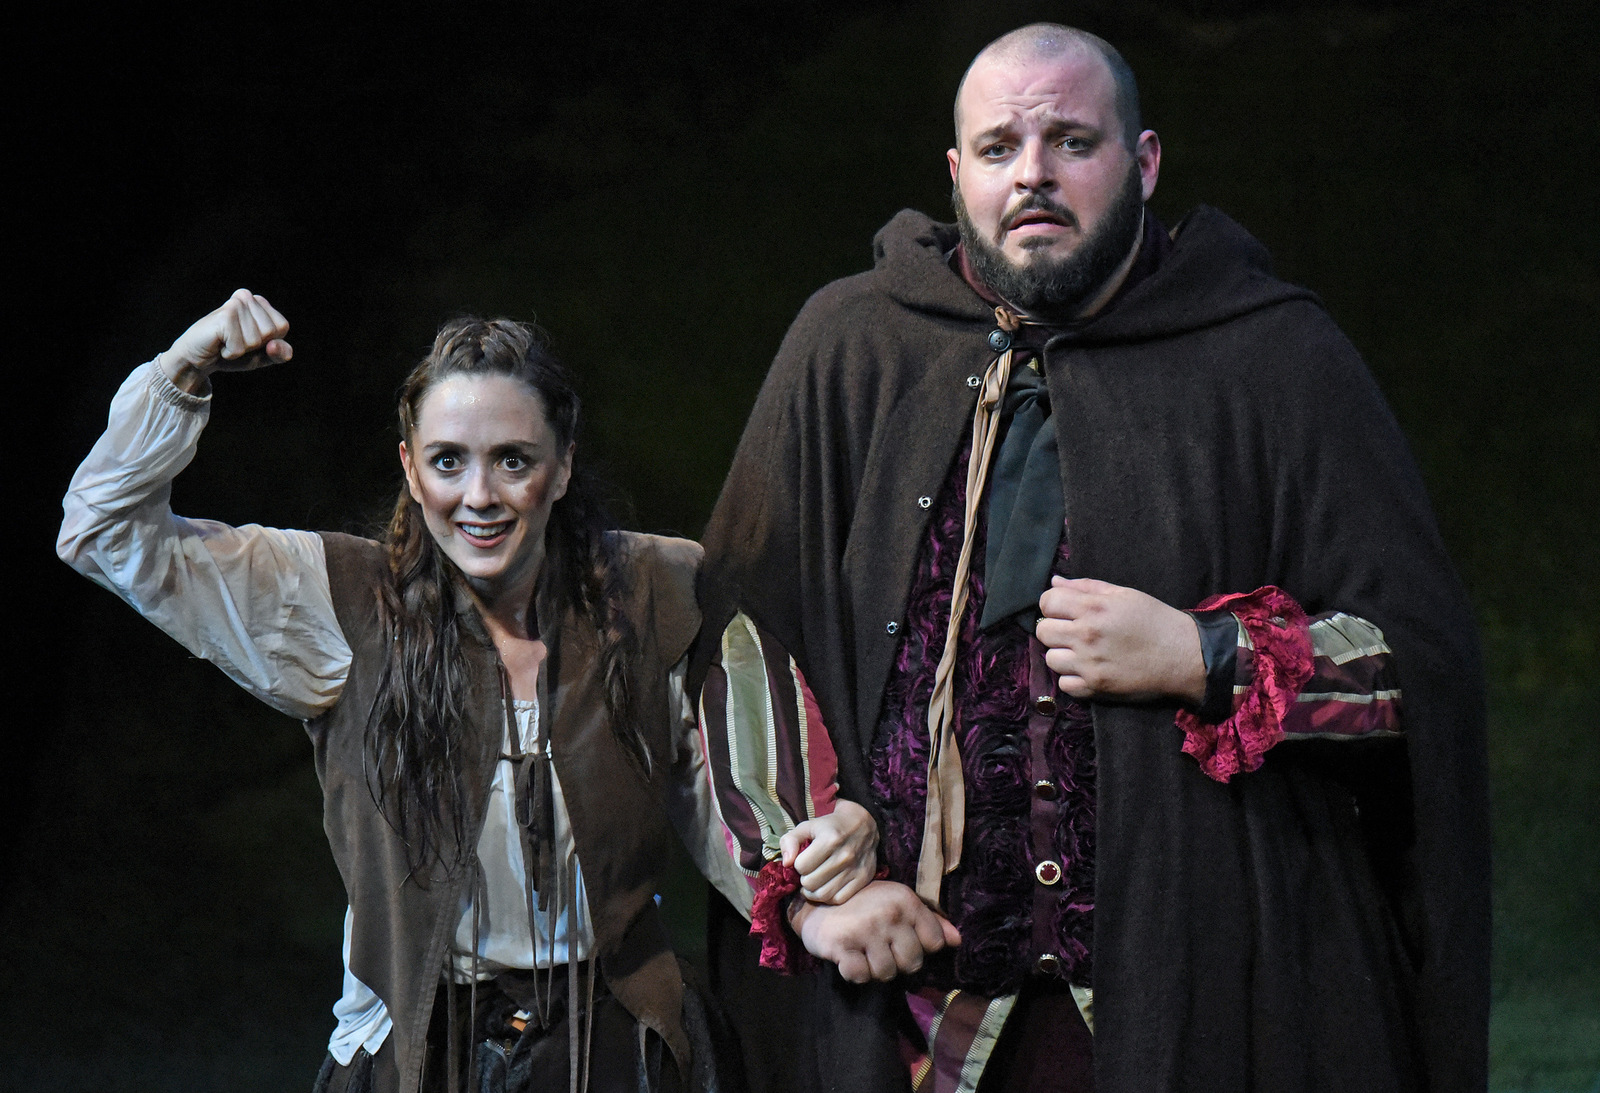 Vesturport and The Wallis’ The Heart of Robin Hood. Pictured (l-r): Christina Bennett Lind and Daniel Franzese. Photo credit: Kevin Parry for The Wallis.